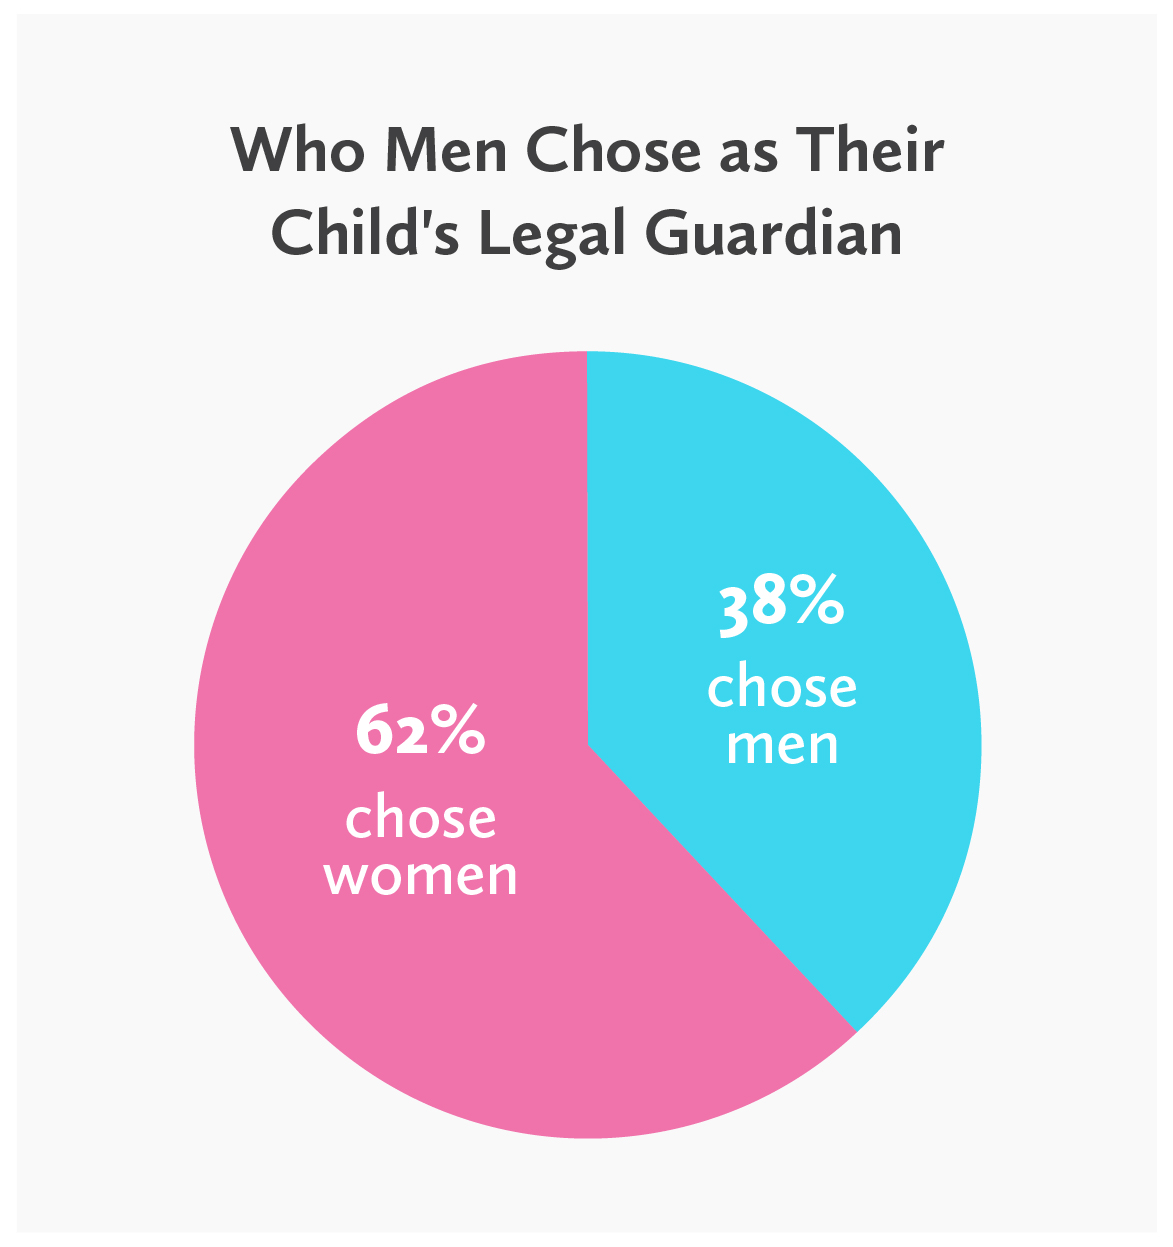 pie chart - who men choose as child's legal guardian by gender